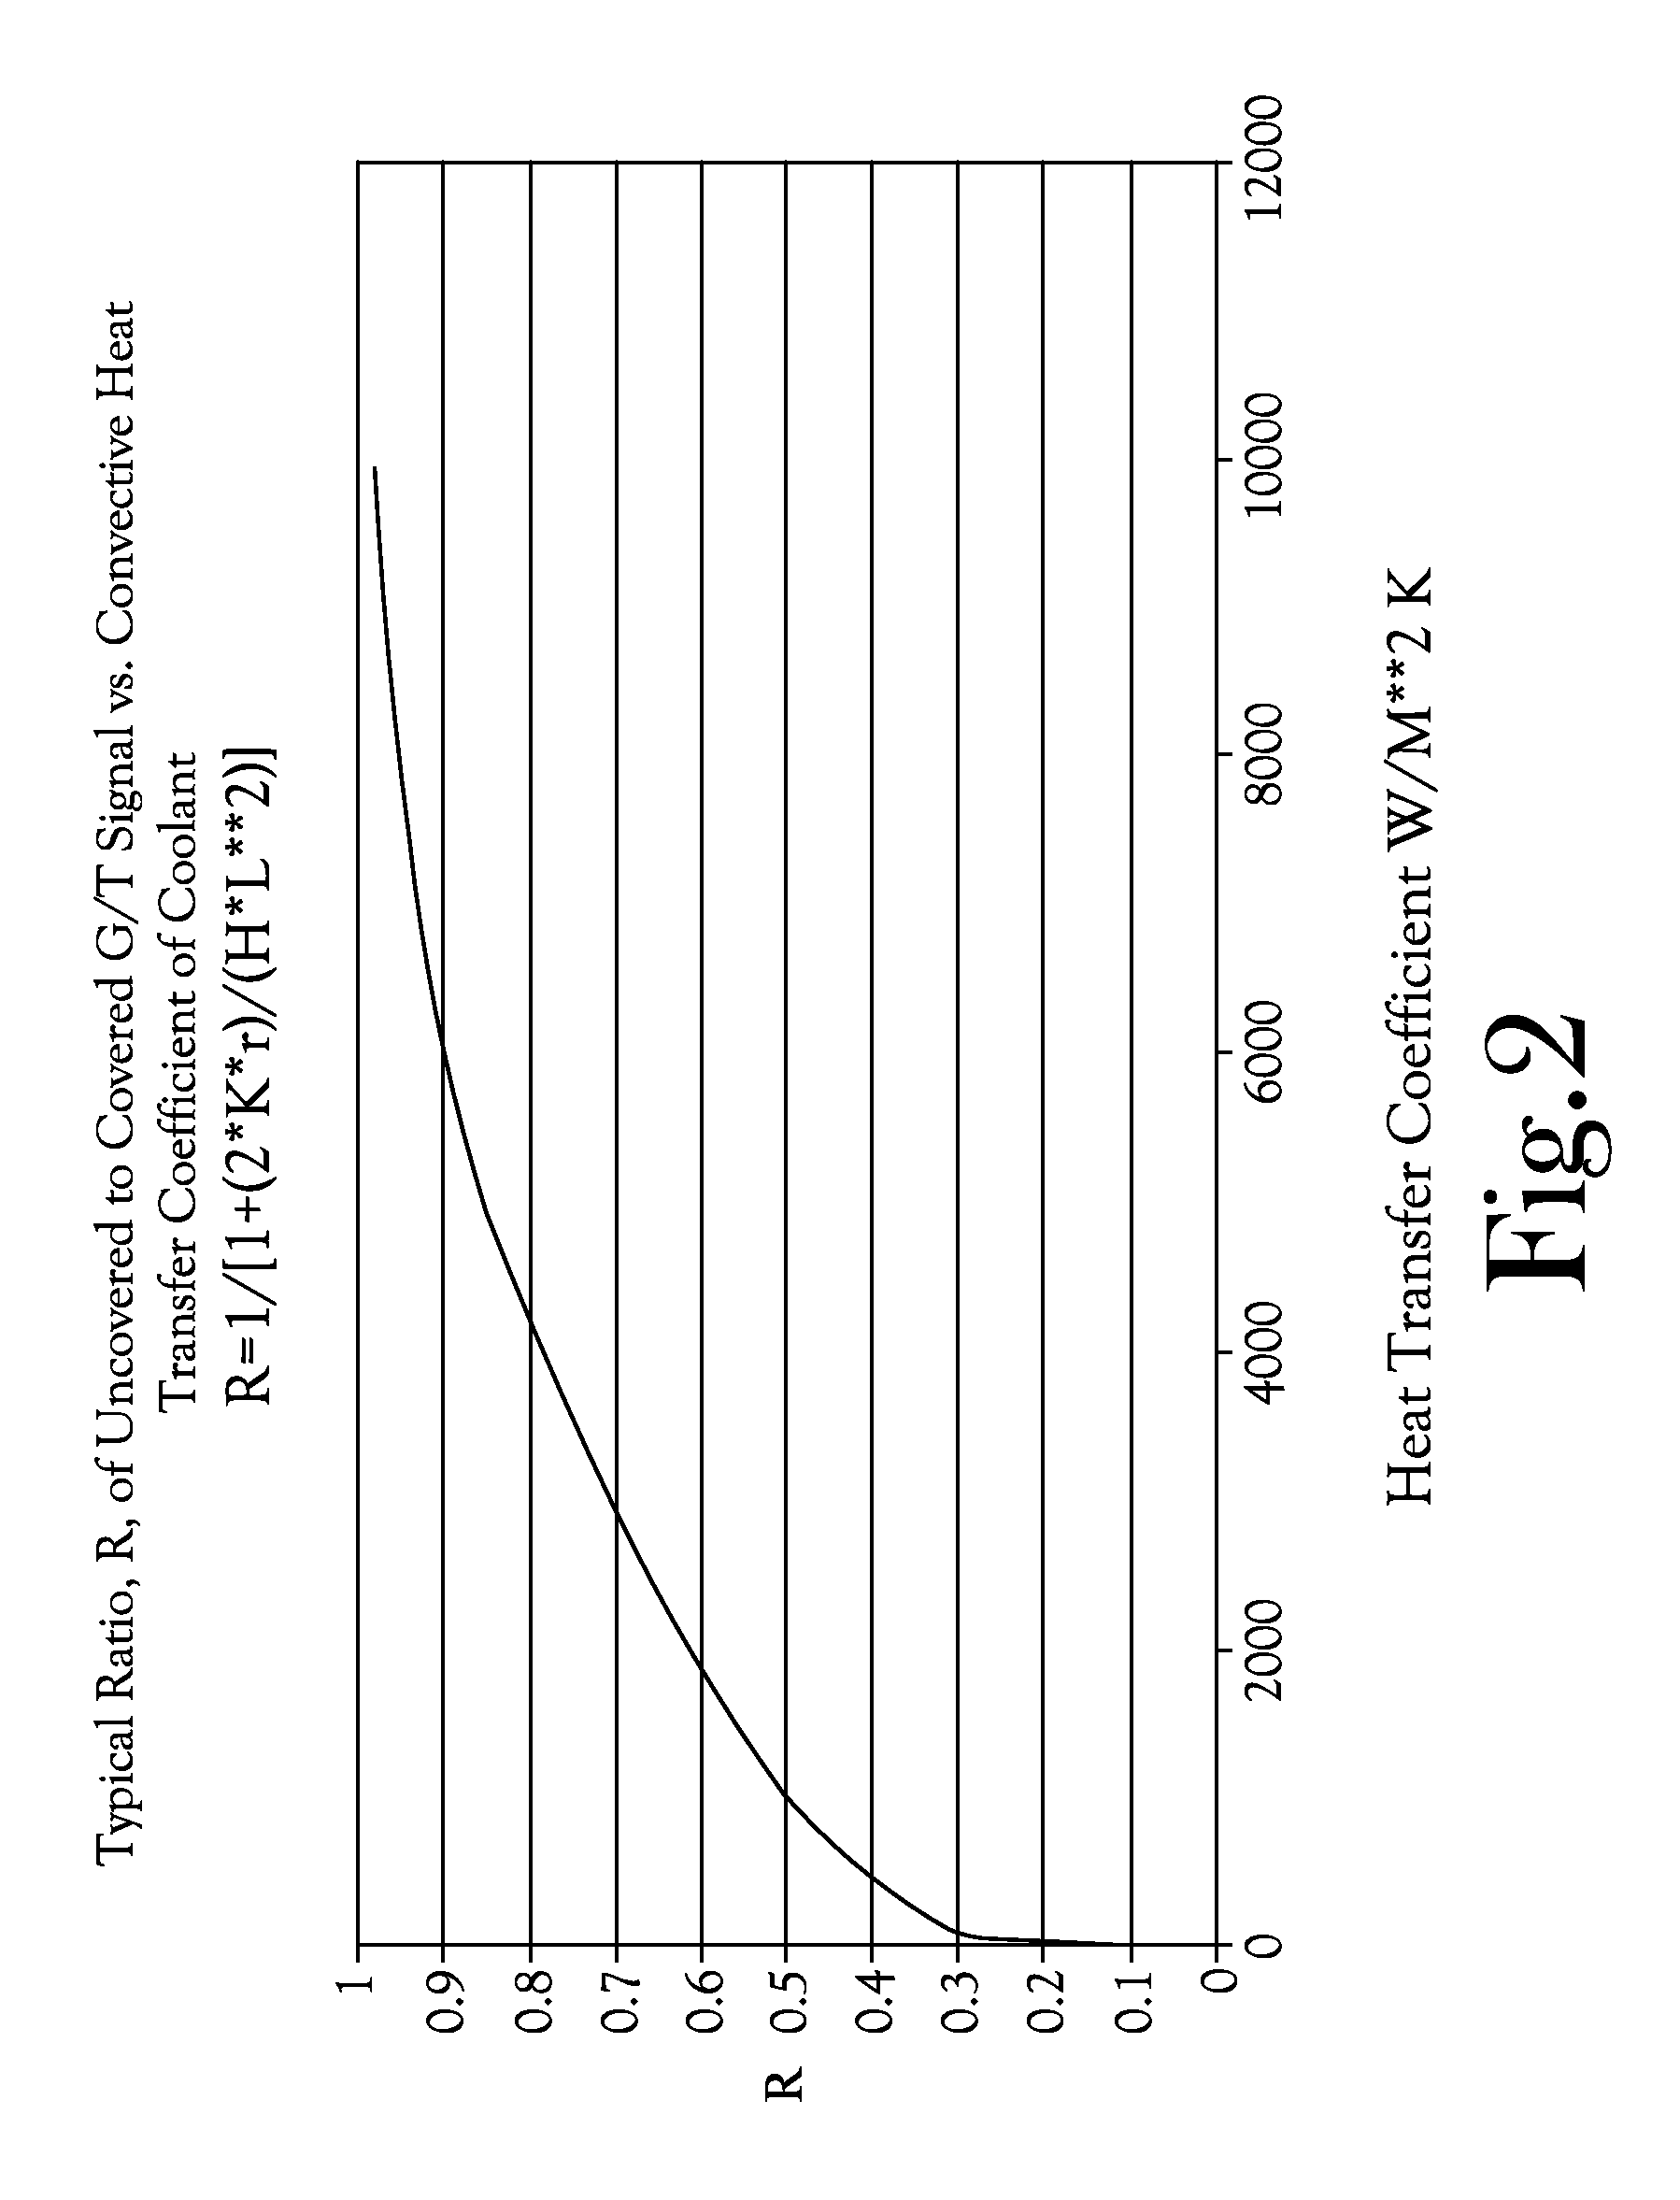 Passive Gamma Thermometer Level Indication And Inadequate Core Monitoring System And Methods For Power Reactor Applications During A Station Electrical Blackout (SBO) Or Prolonged Station Blackout (PSBO) Event